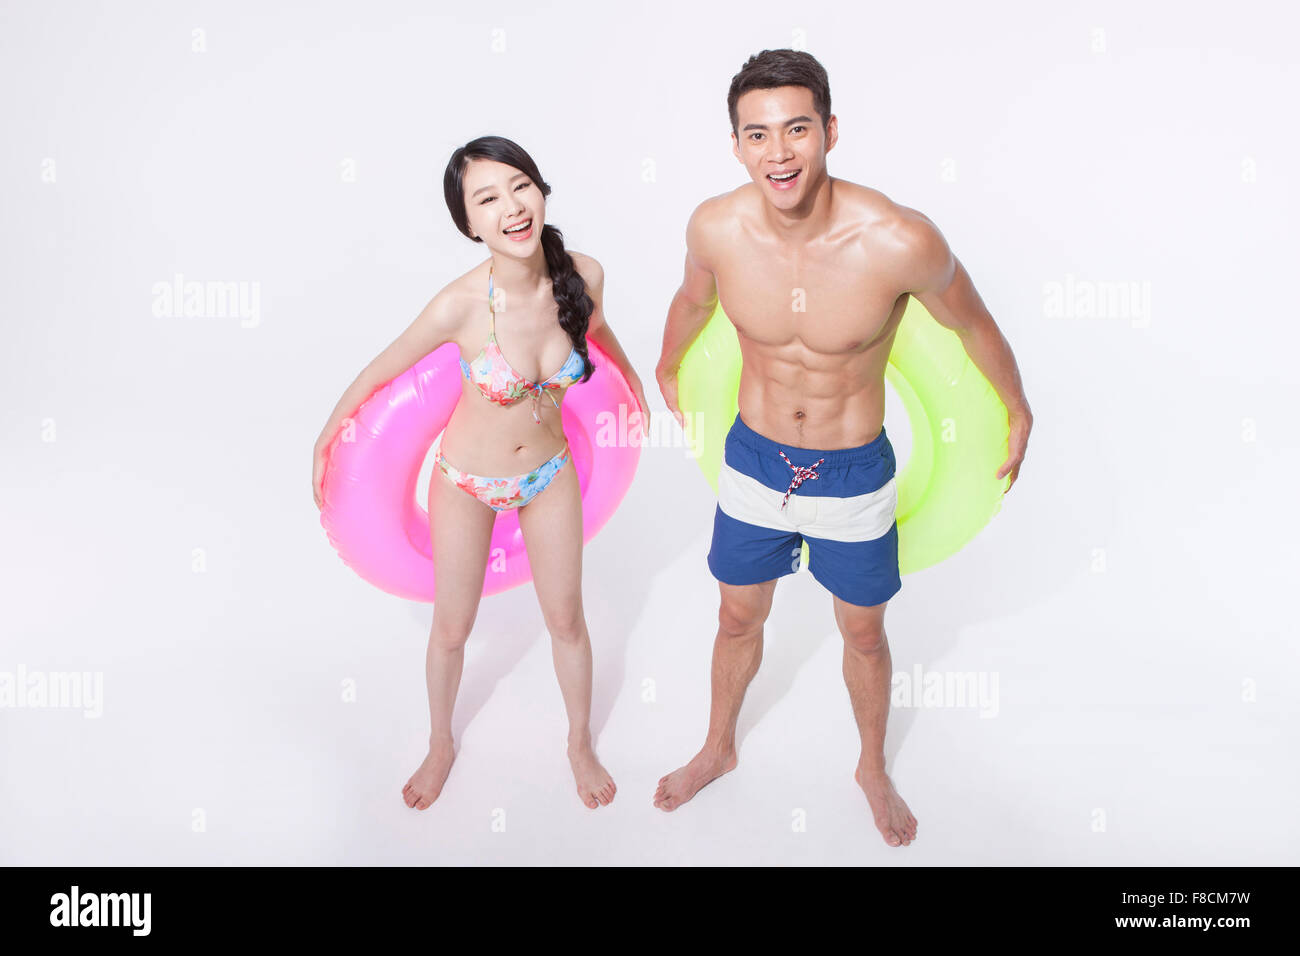 High angle of a couple in beach wear and holding a ring tube behind their back each and smiling Stock Photo